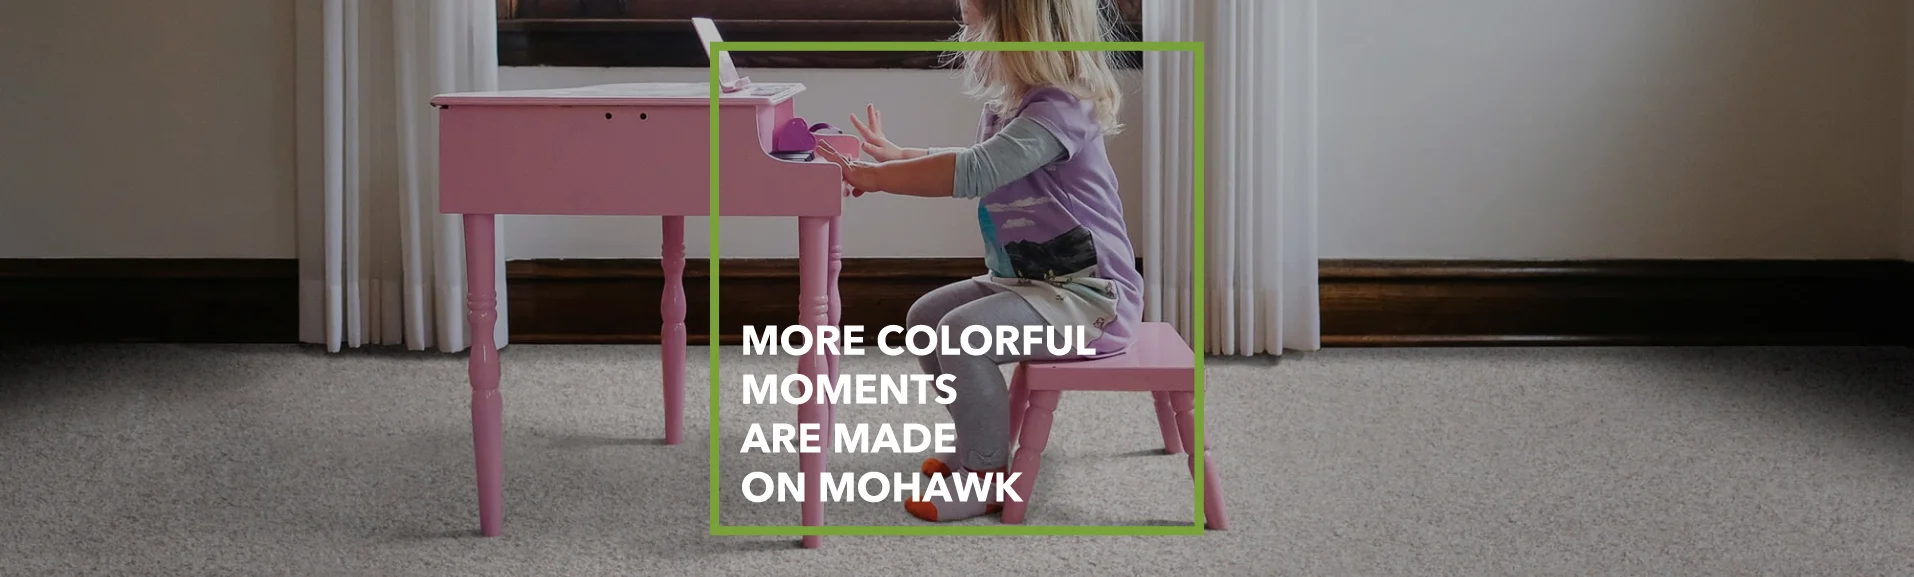 More Colorful Moments Are Made On Mohawk